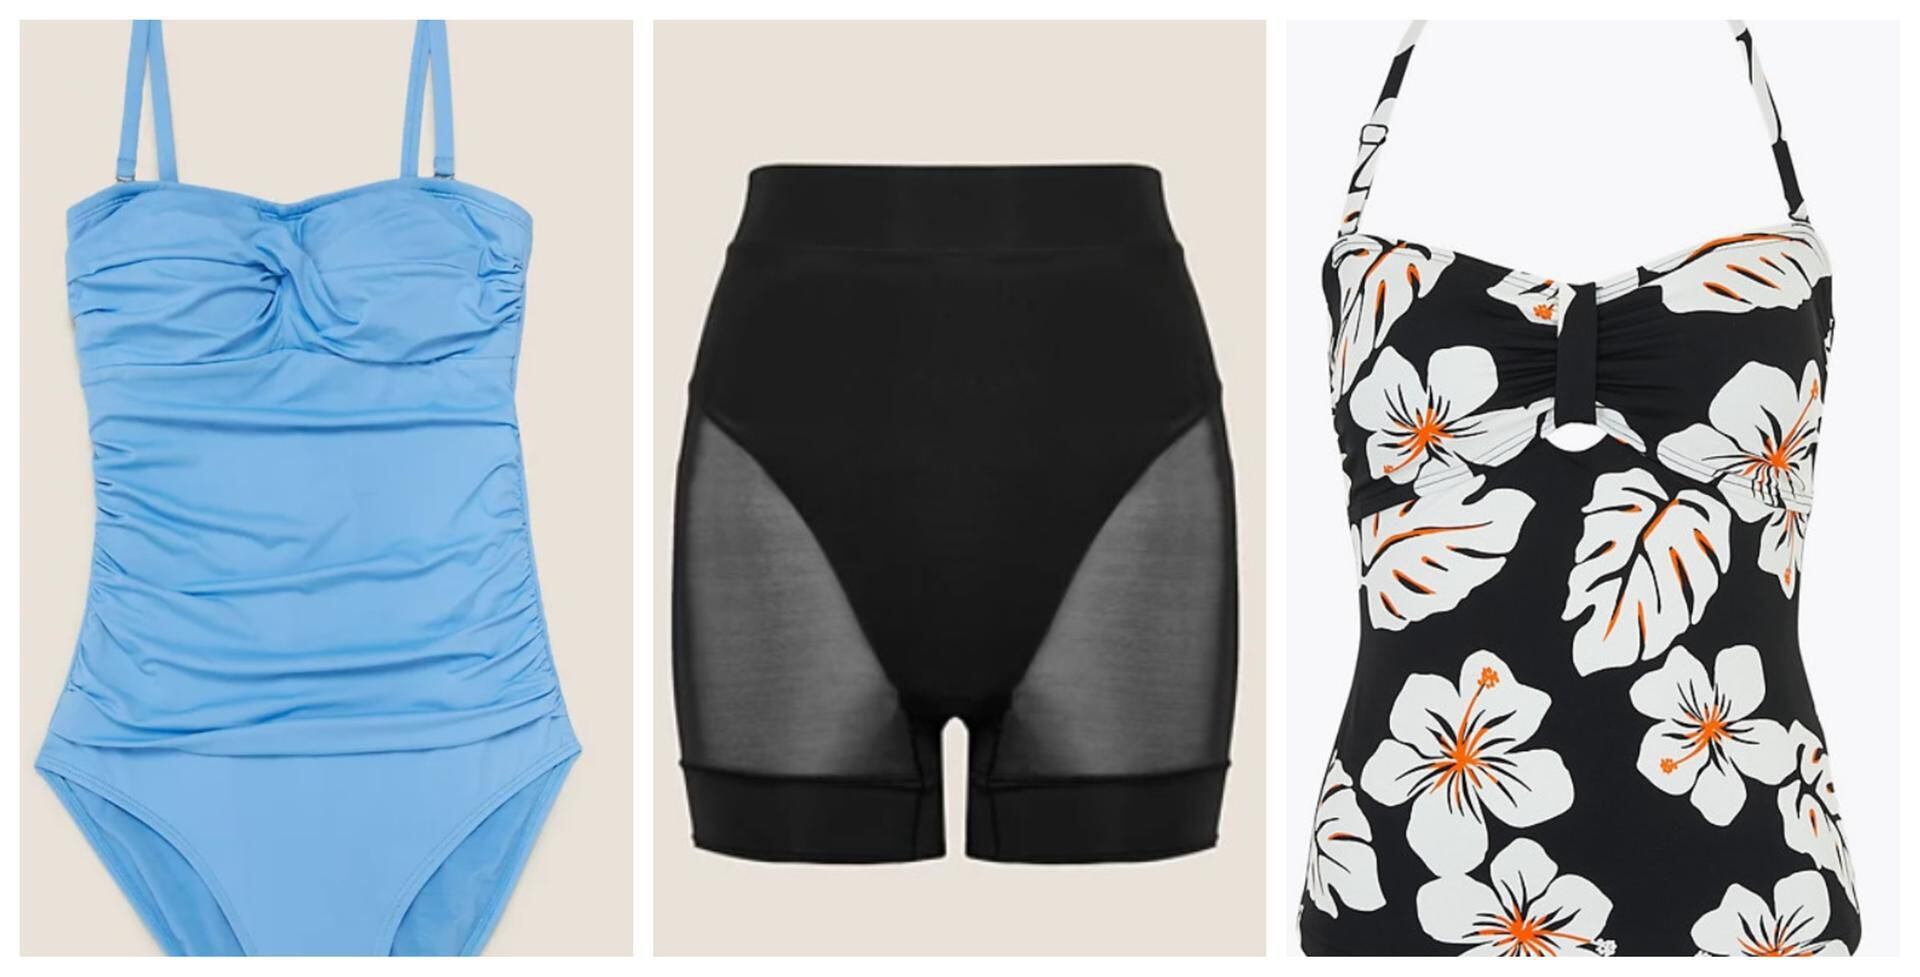 From Spanx and Skims to M&S: Where to find shapewear solutions